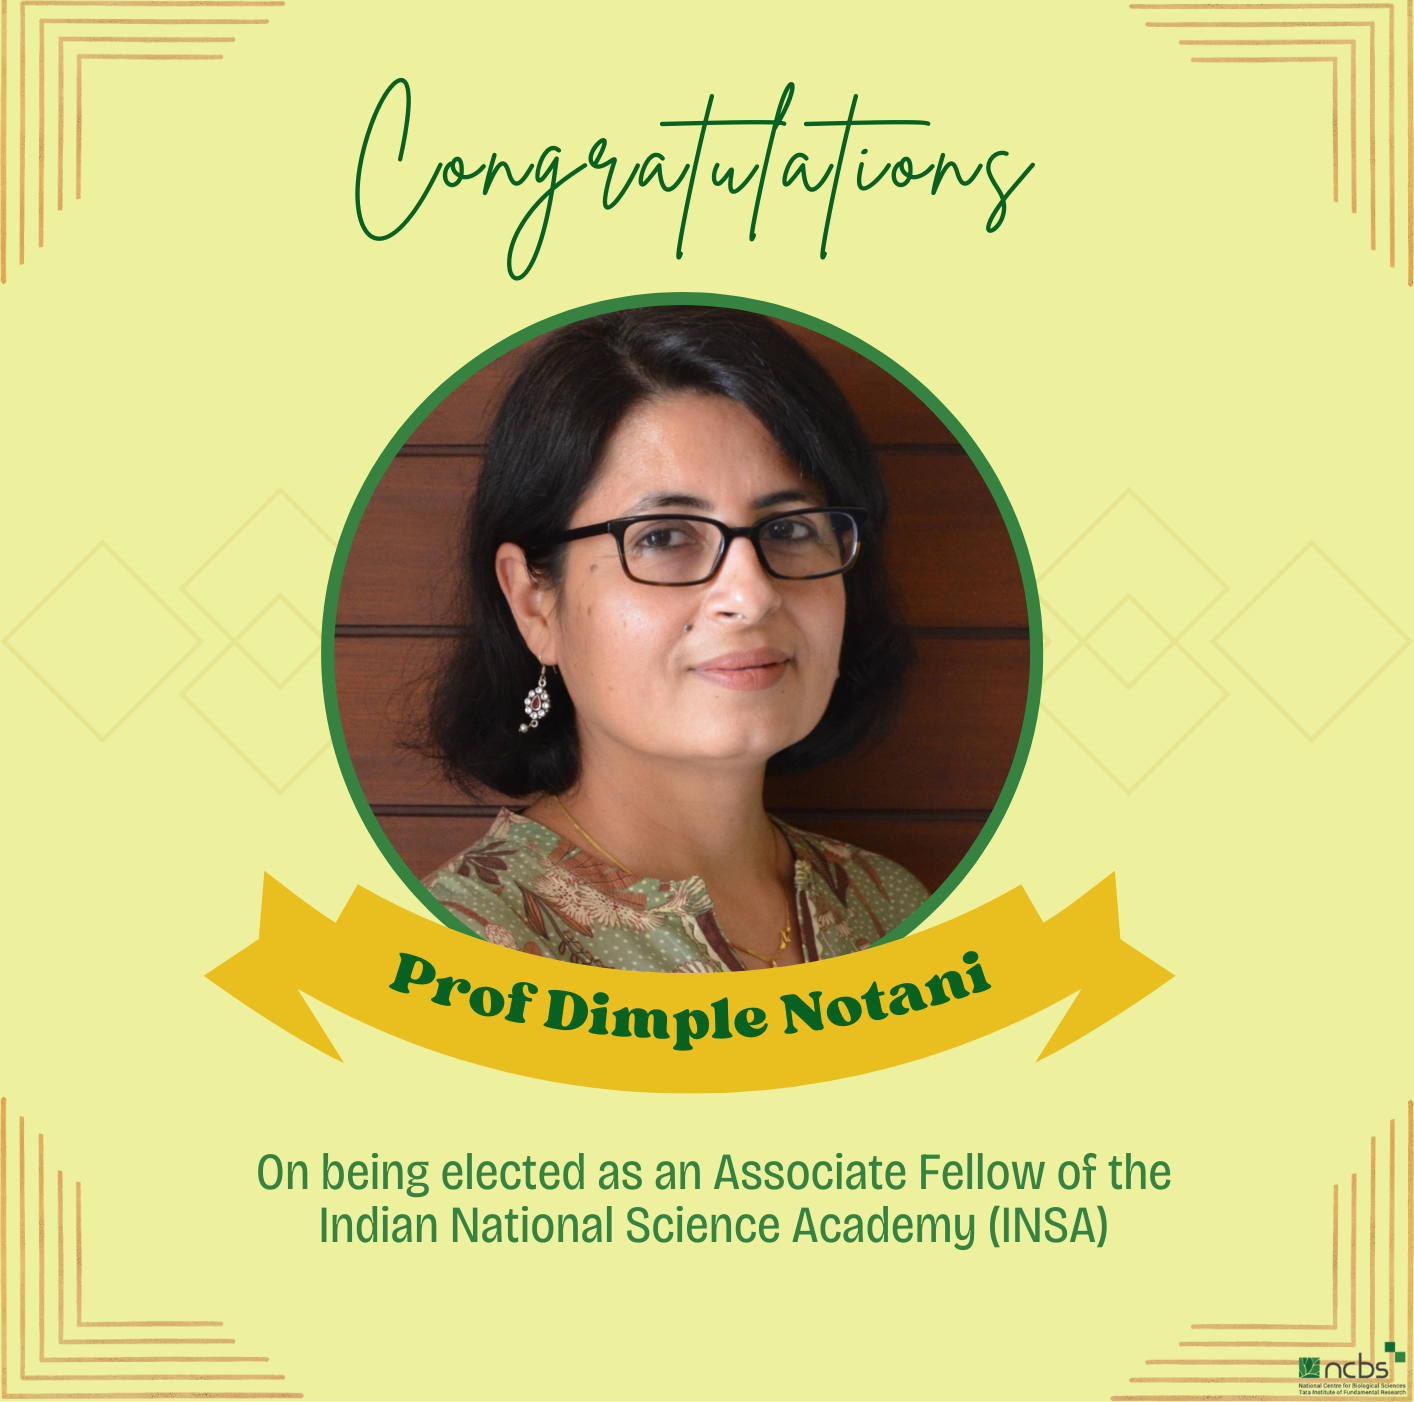 Prof. Dimple Notani selected as an Associate Fellow of the Indian National Science Academy (INSA)